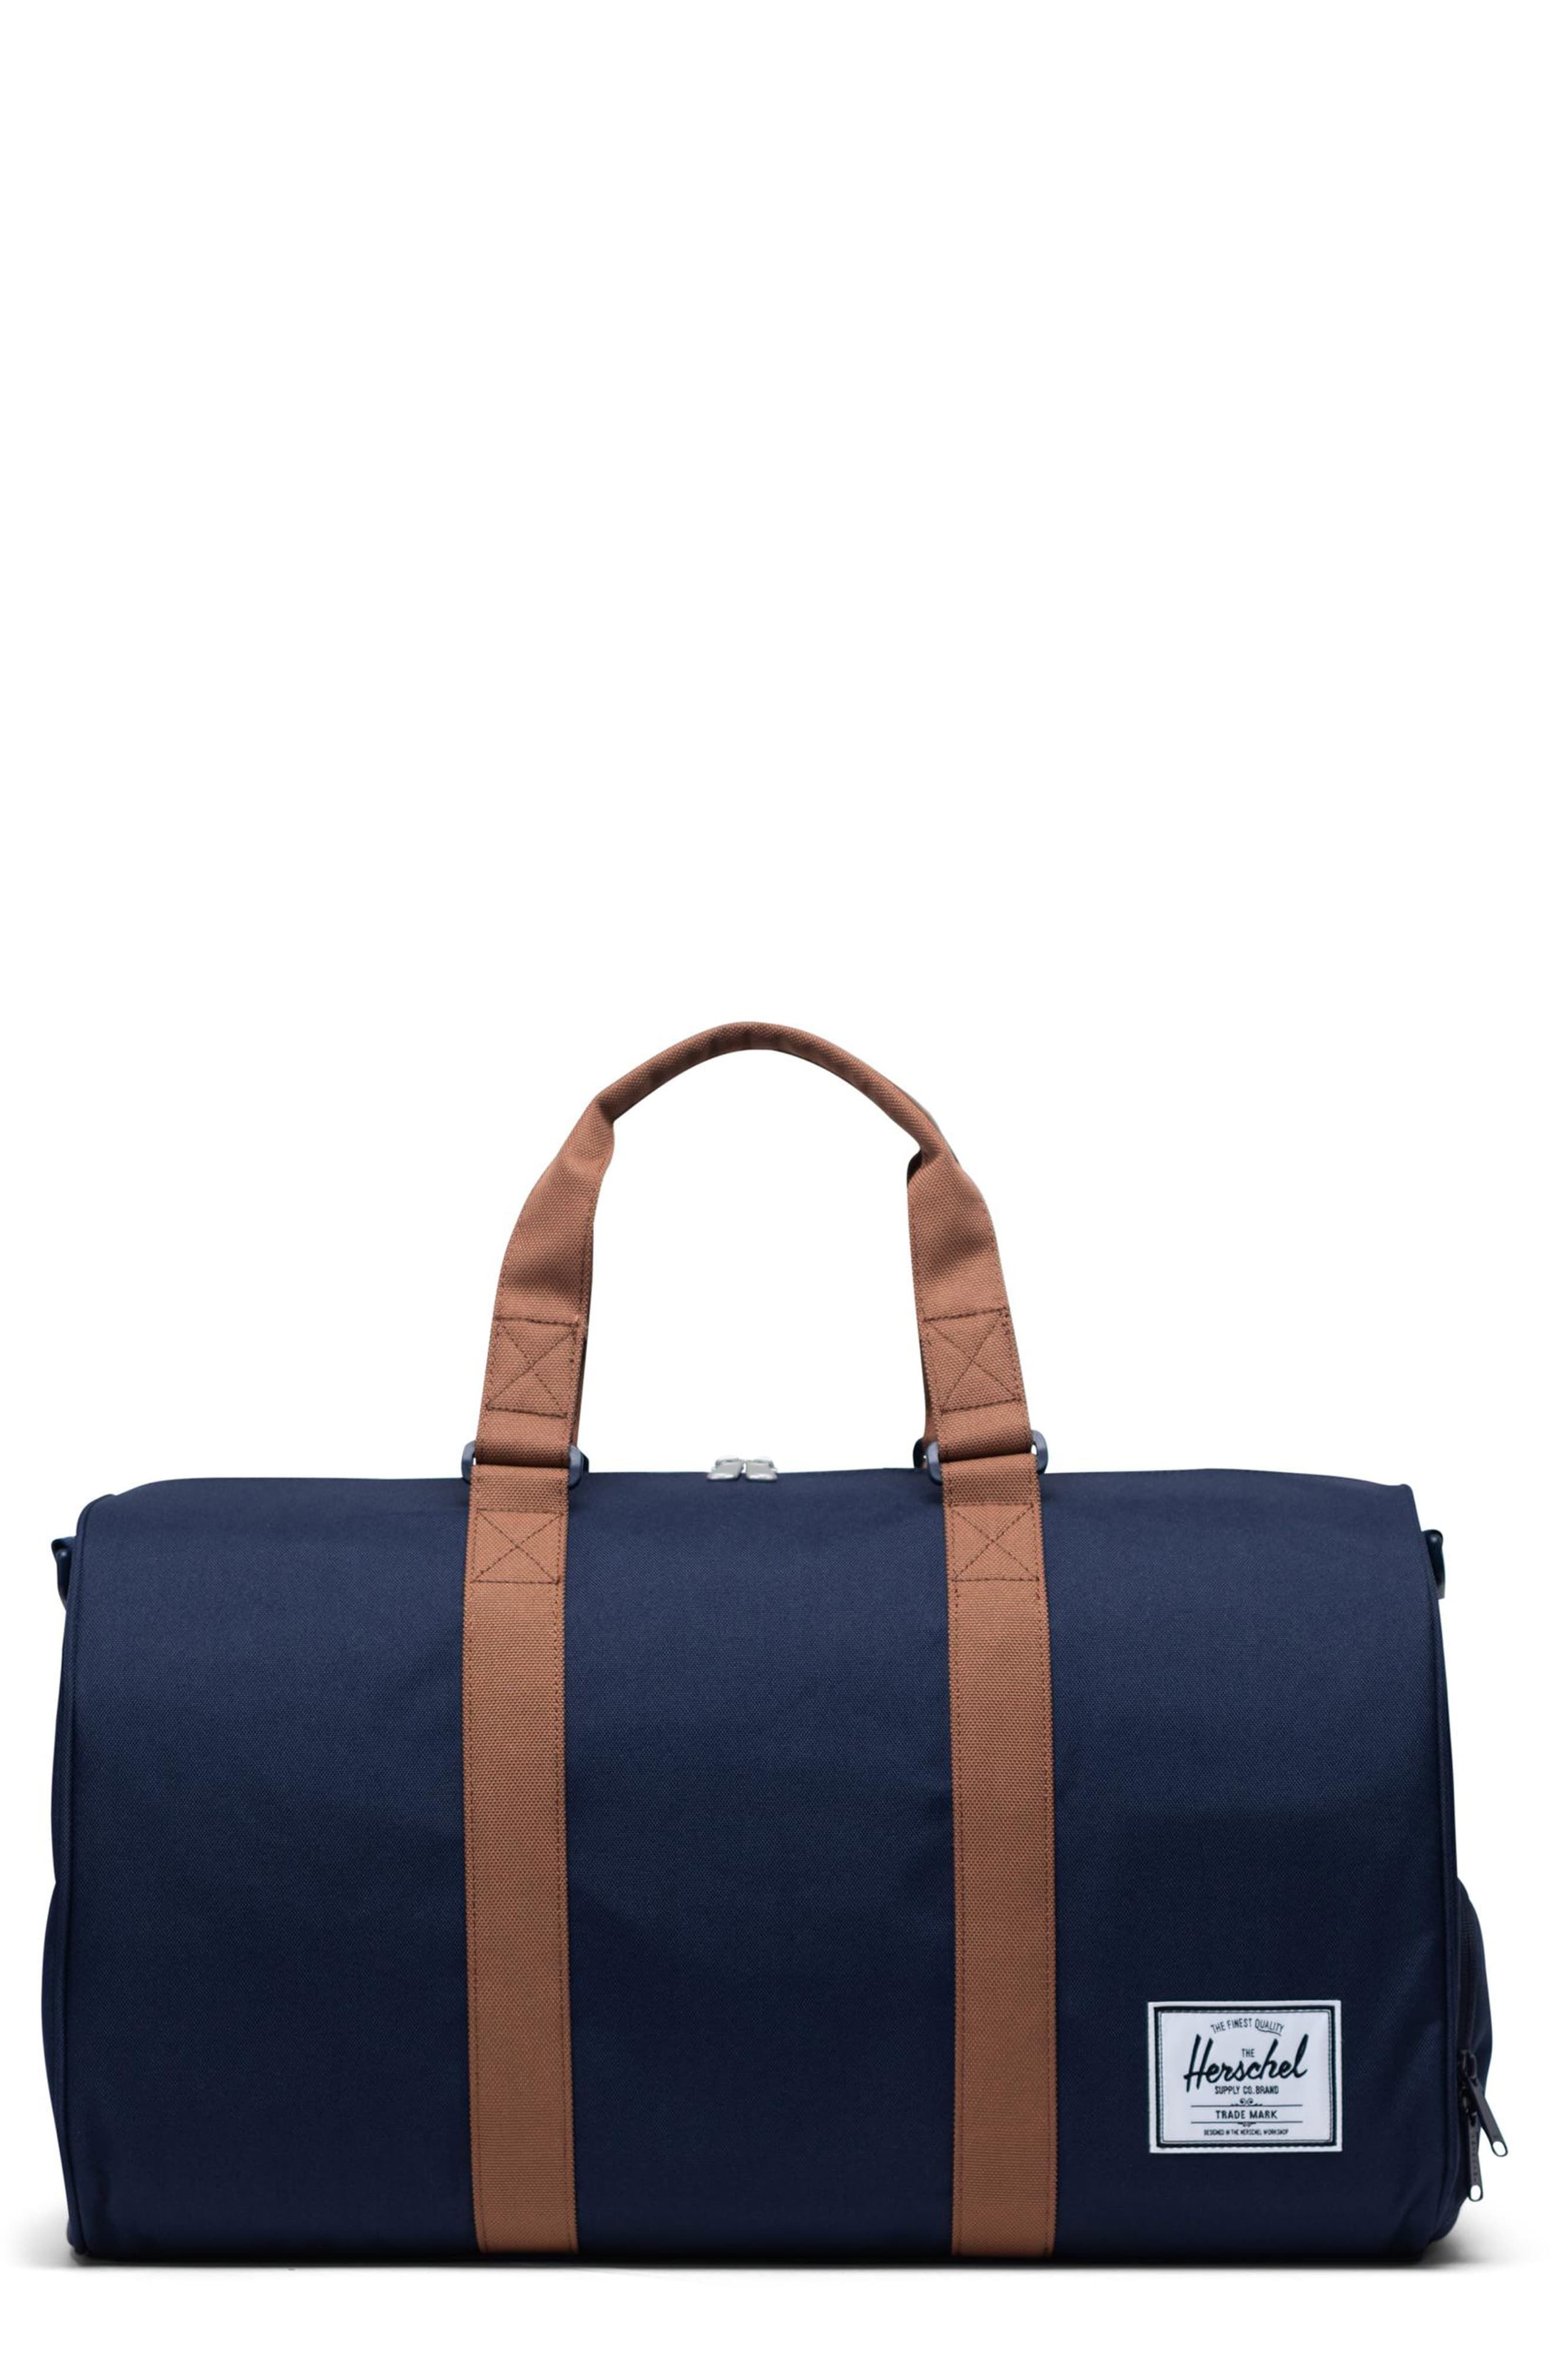 Marni Leather Fabric Travel Handbag in Blue for Men Mens Bags Luggage and suitcases 